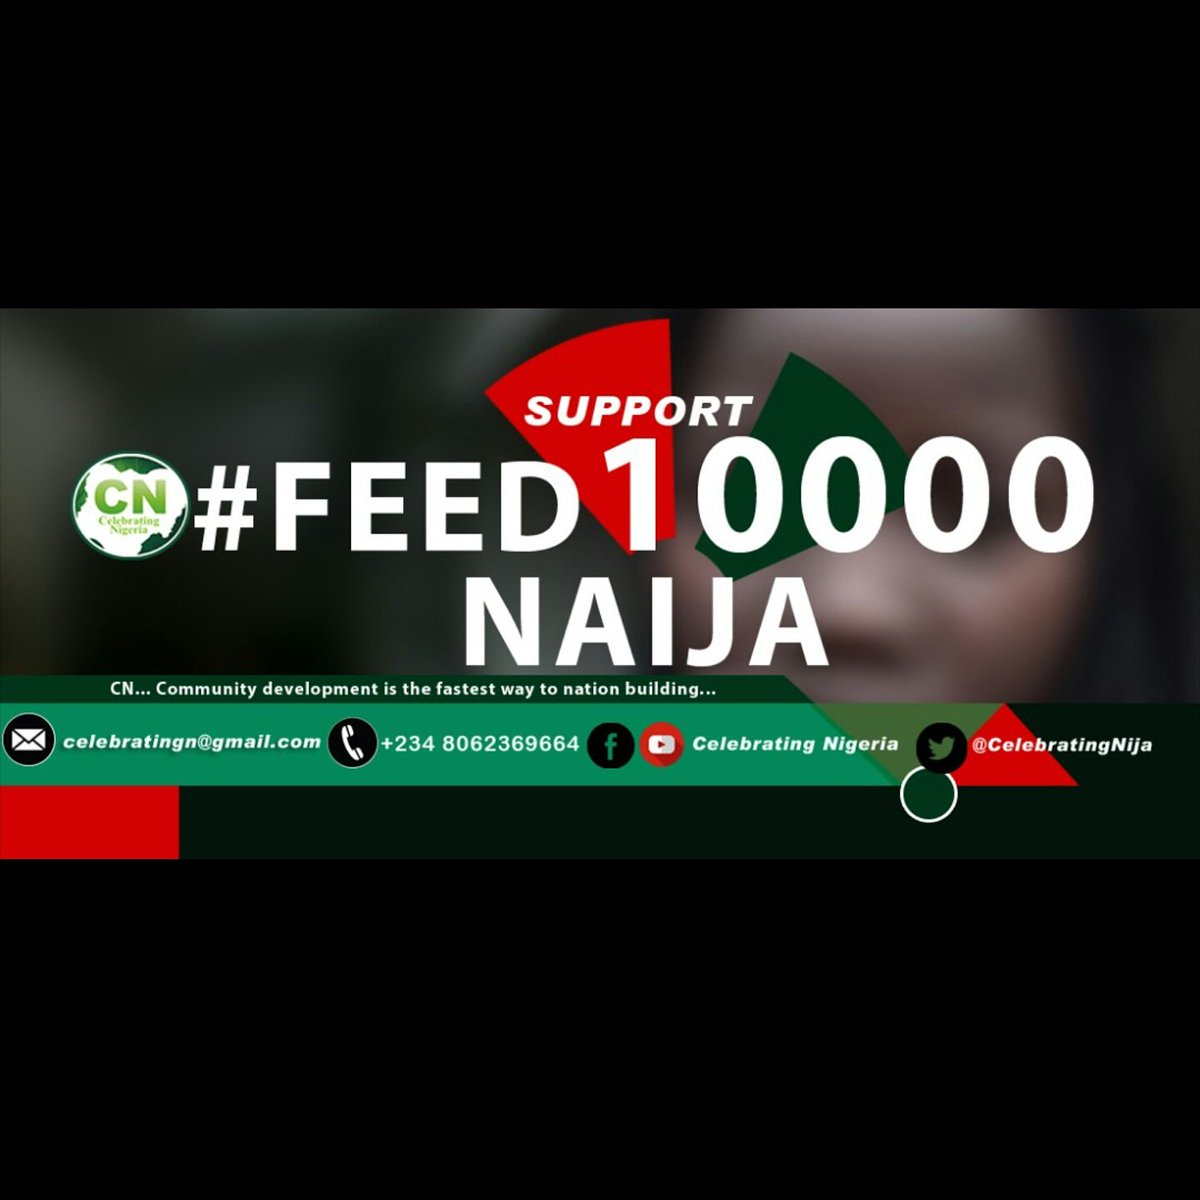 Do you ever have to skipp a meal? 
If your answer is NO then imagine what it feels like to be hungry without the hope of getting something to eat.
Join Celebrating Nigeria as we feed 10,000 less privileged. With just NGN150 you can feed a person.

Support #ThePowerOf15